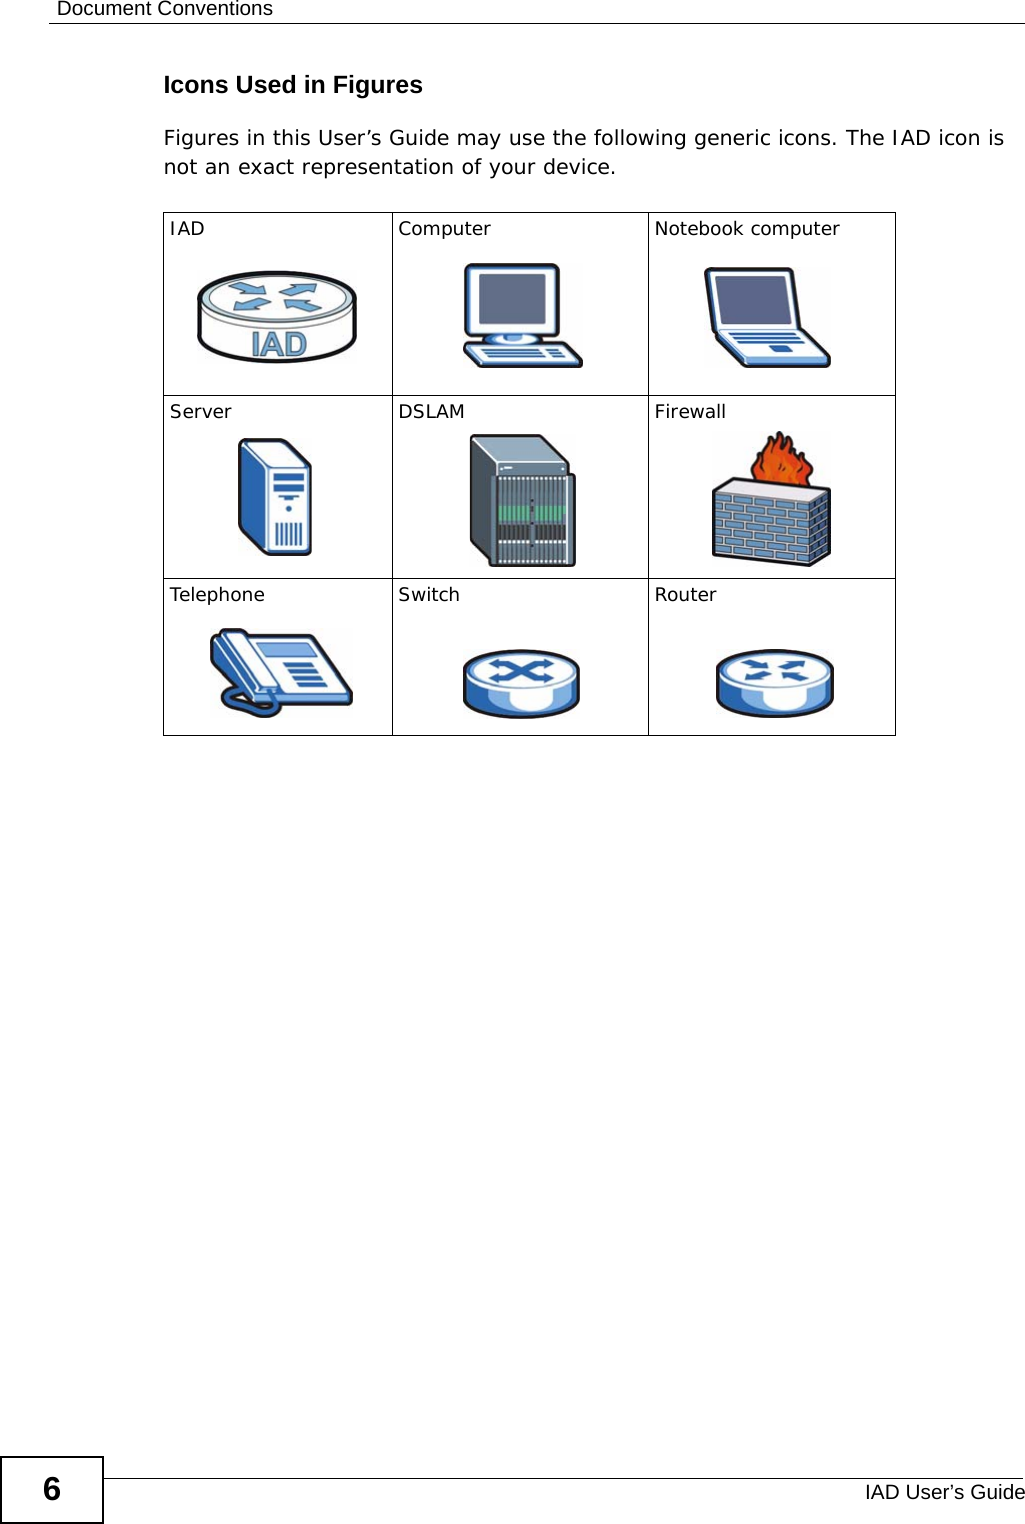 Document ConventionsIAD User’s Guide6Icons Used in FiguresFigures in this User’s Guide may use the following generic icons. The IAD icon is not an exact representation of your device.IAD Computer Notebook computerServer DSLAM FirewallTelephone Switch Router